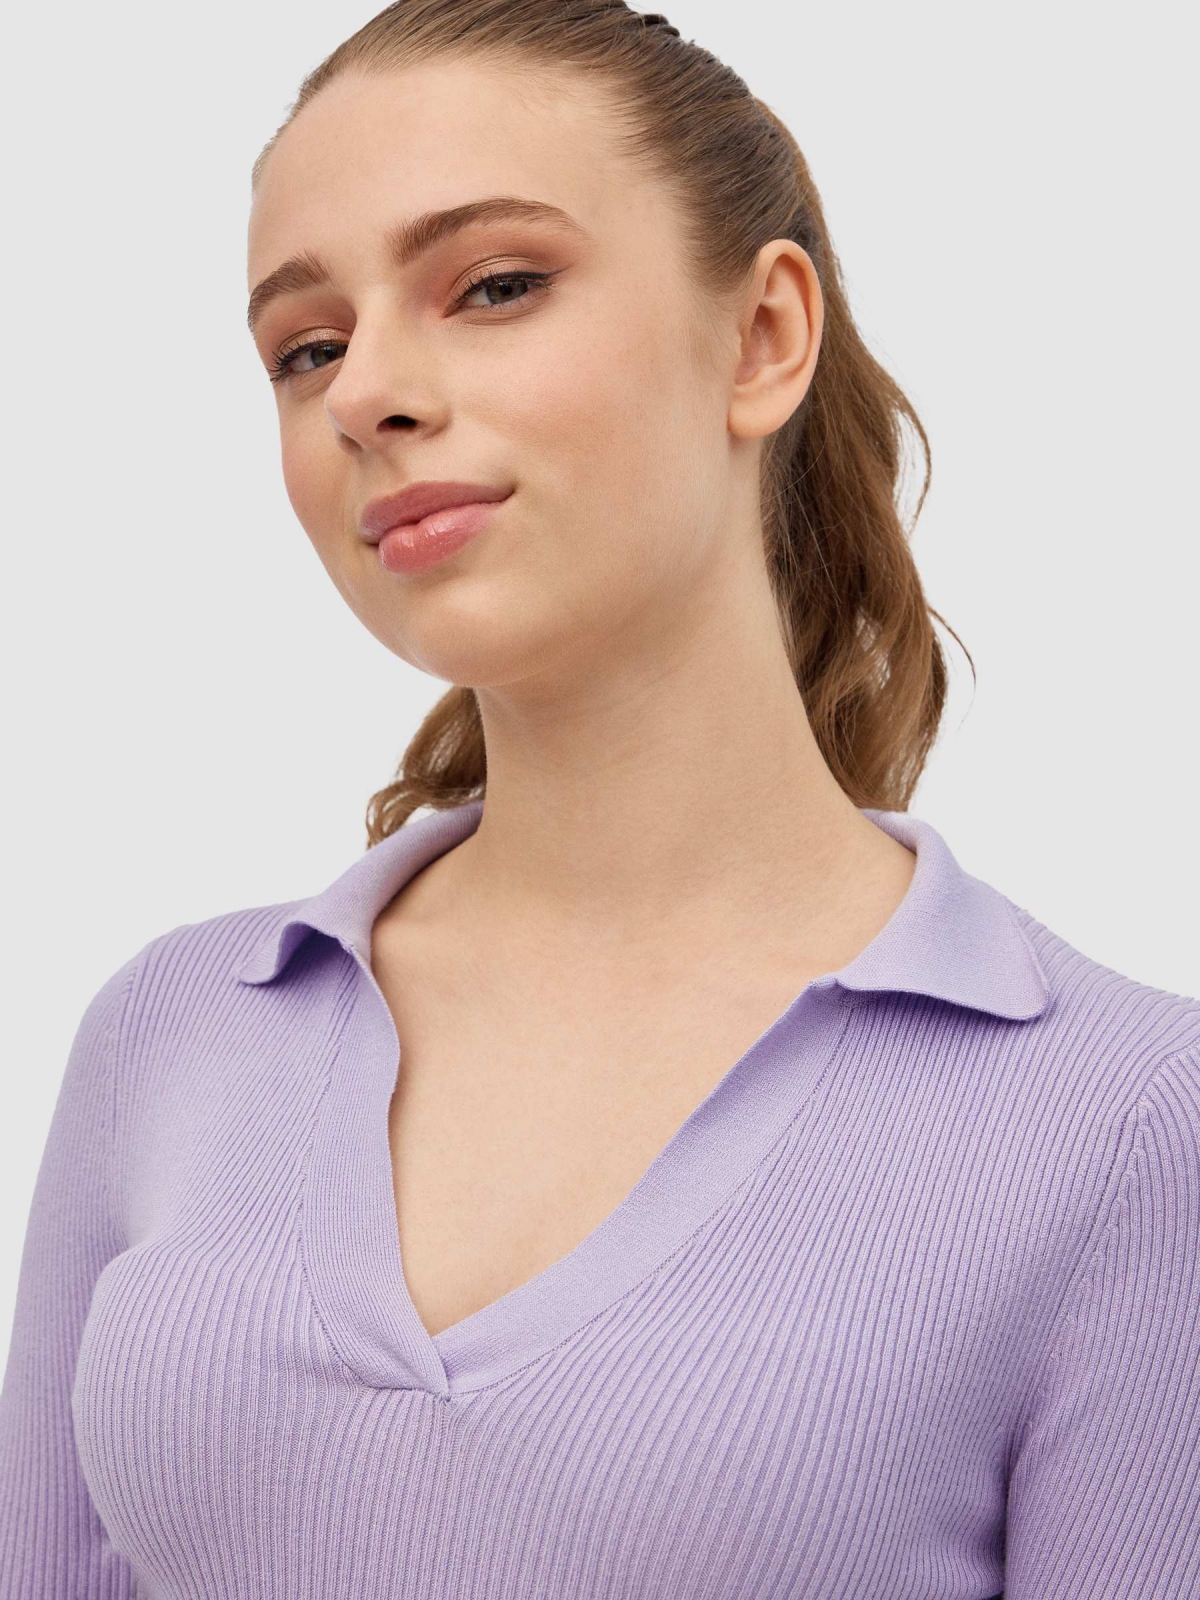 Slim crop polo neck sweater violet detail view